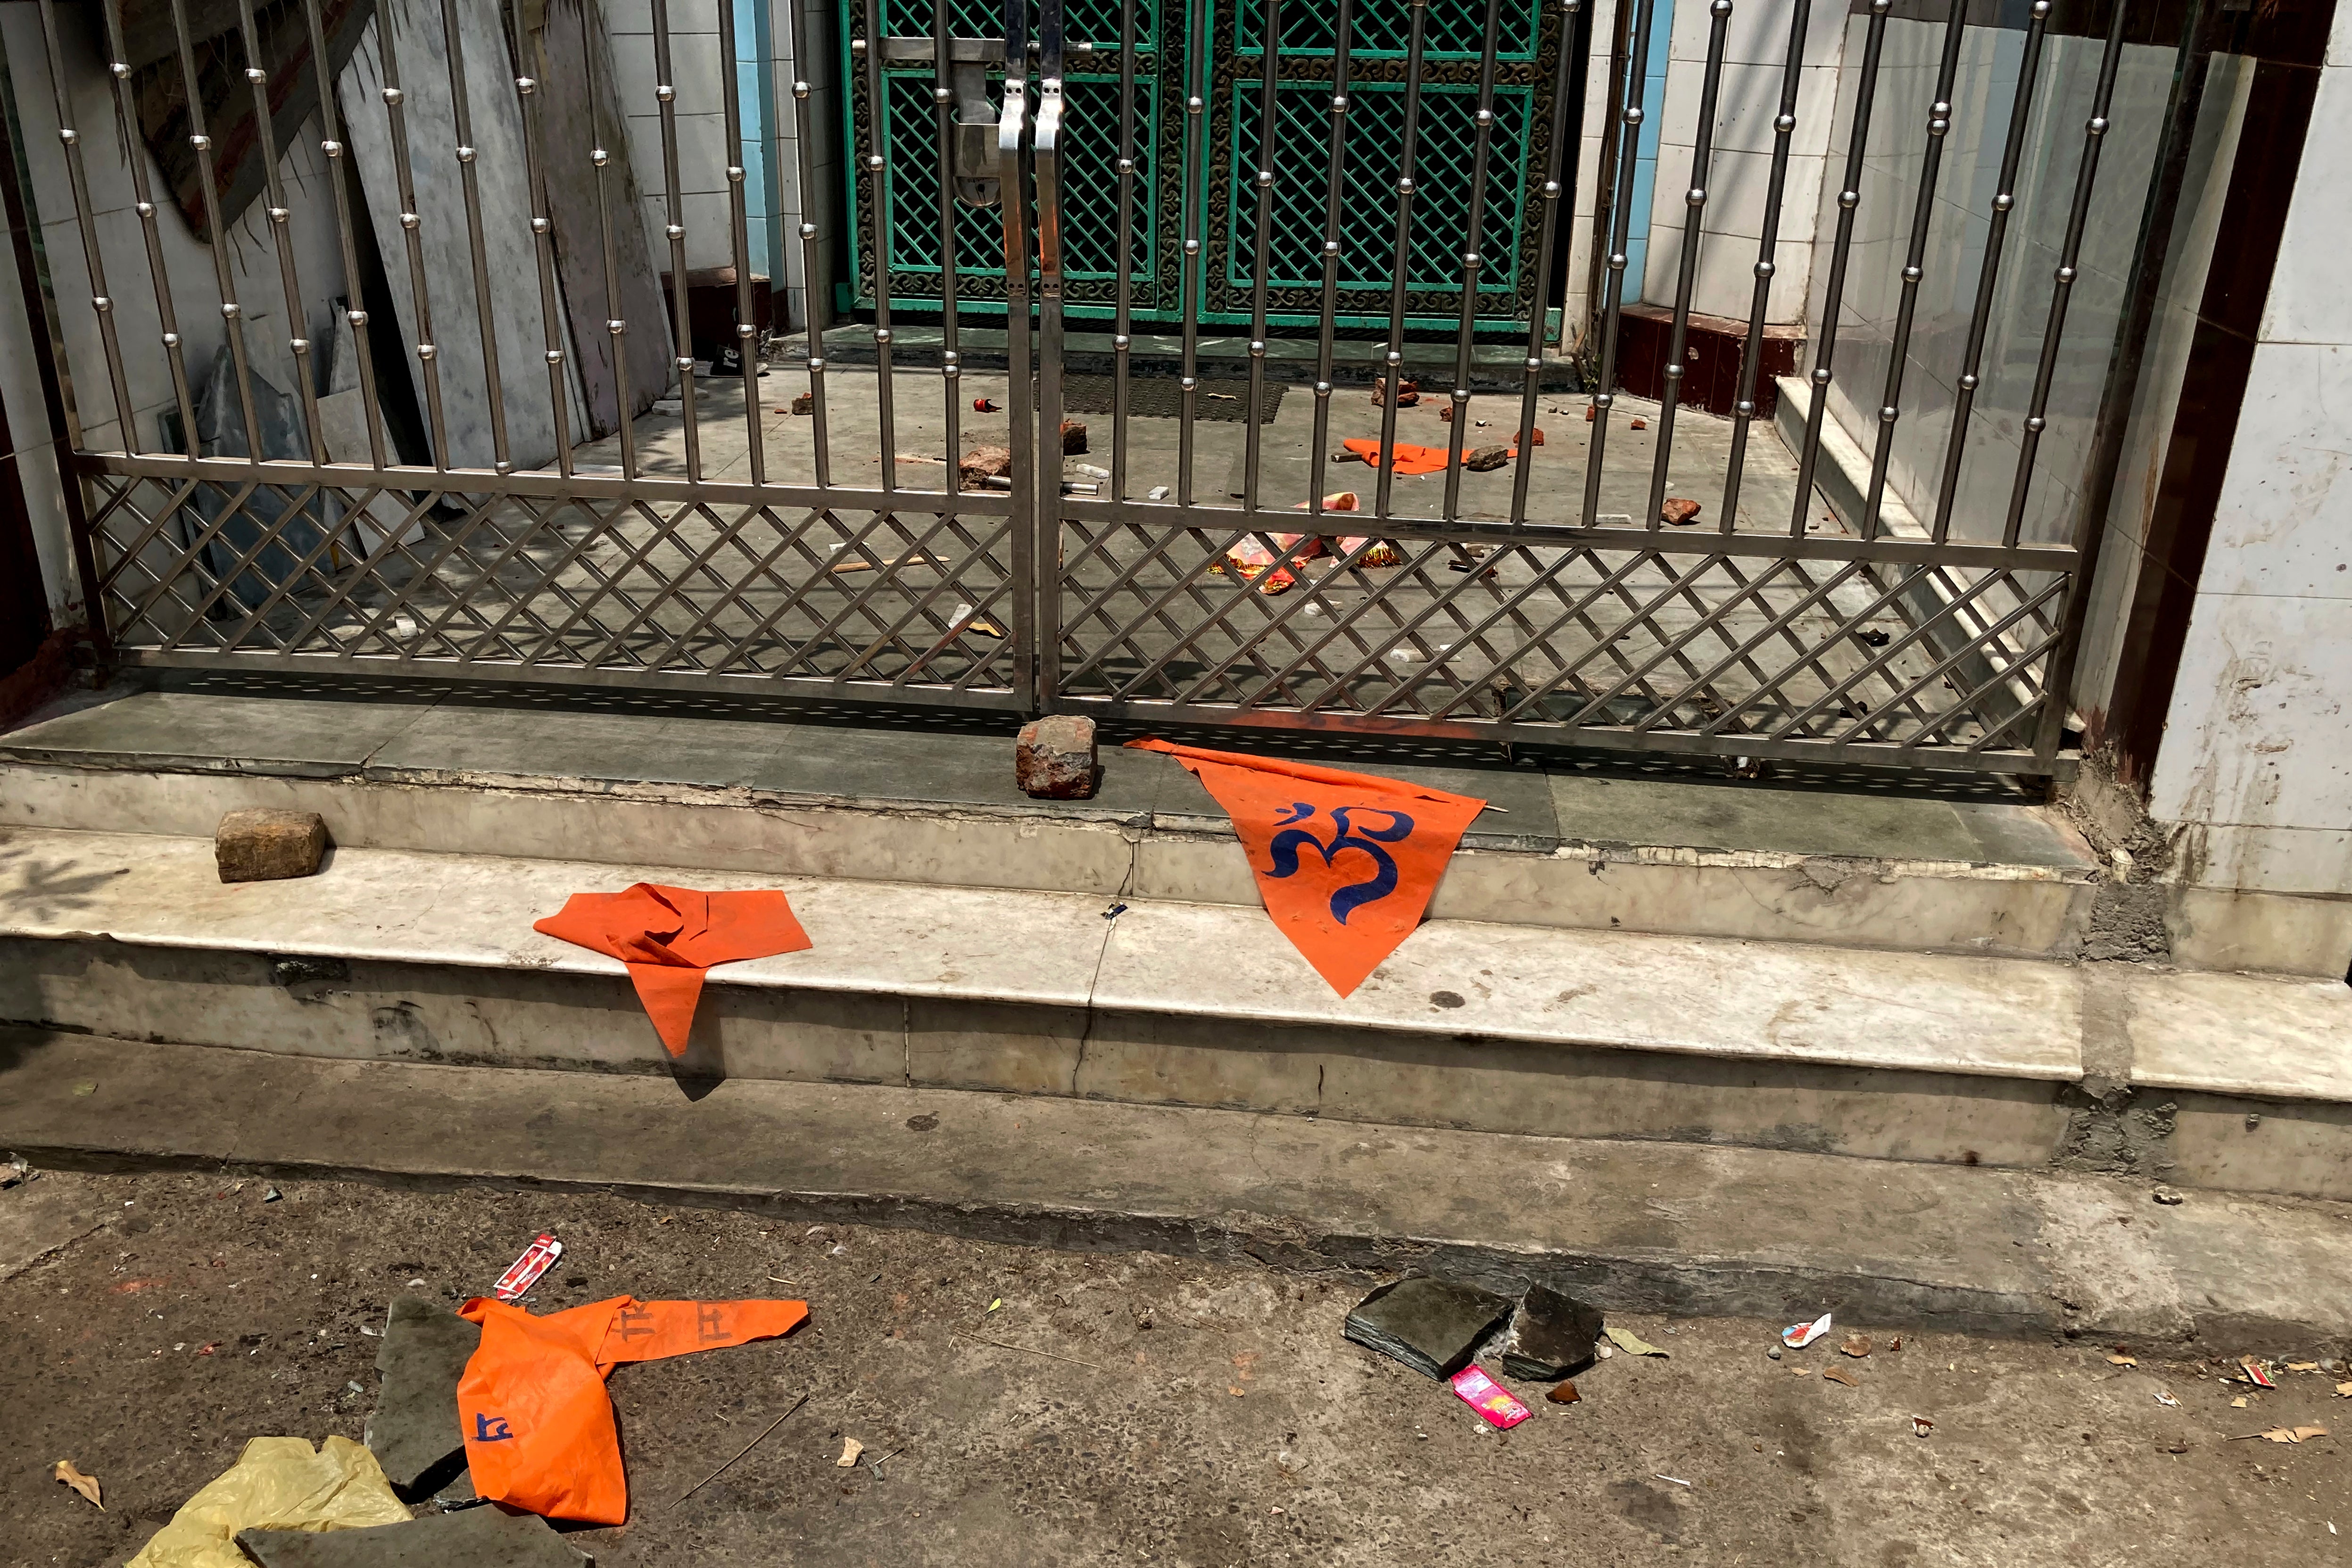 Saffron flags lie outside a mosque a day after communal clashes in Jahangirpuri, a neighborhood in northwest Delhi, recently